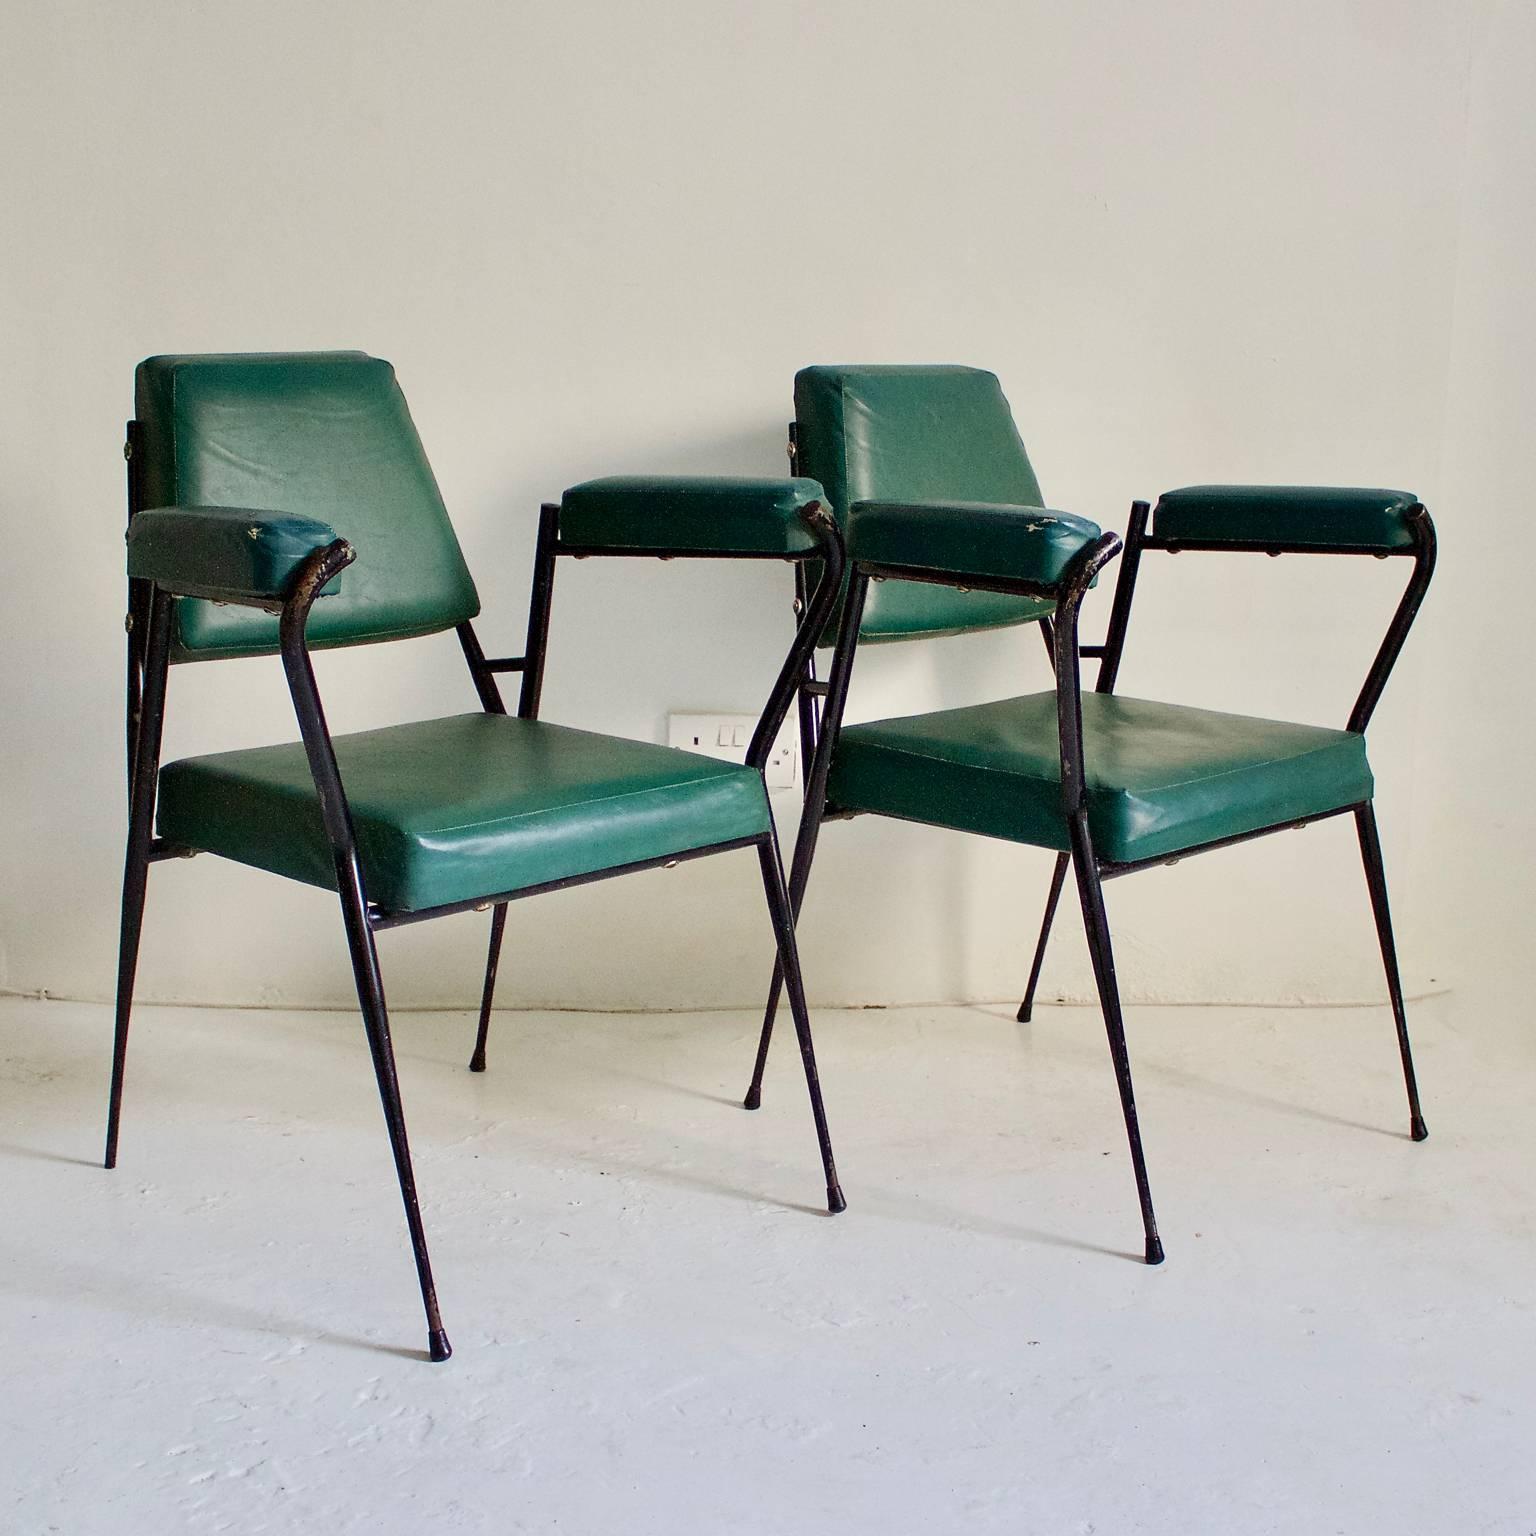 A pair of simple Italian office chairs or occasional chairs, manufactured by Fratelli Ferrari & Co., 1950s.

The chairs have black metal frames with fine pointed legs, and green upholstered panels and armrests finished in original fabric. The chairs